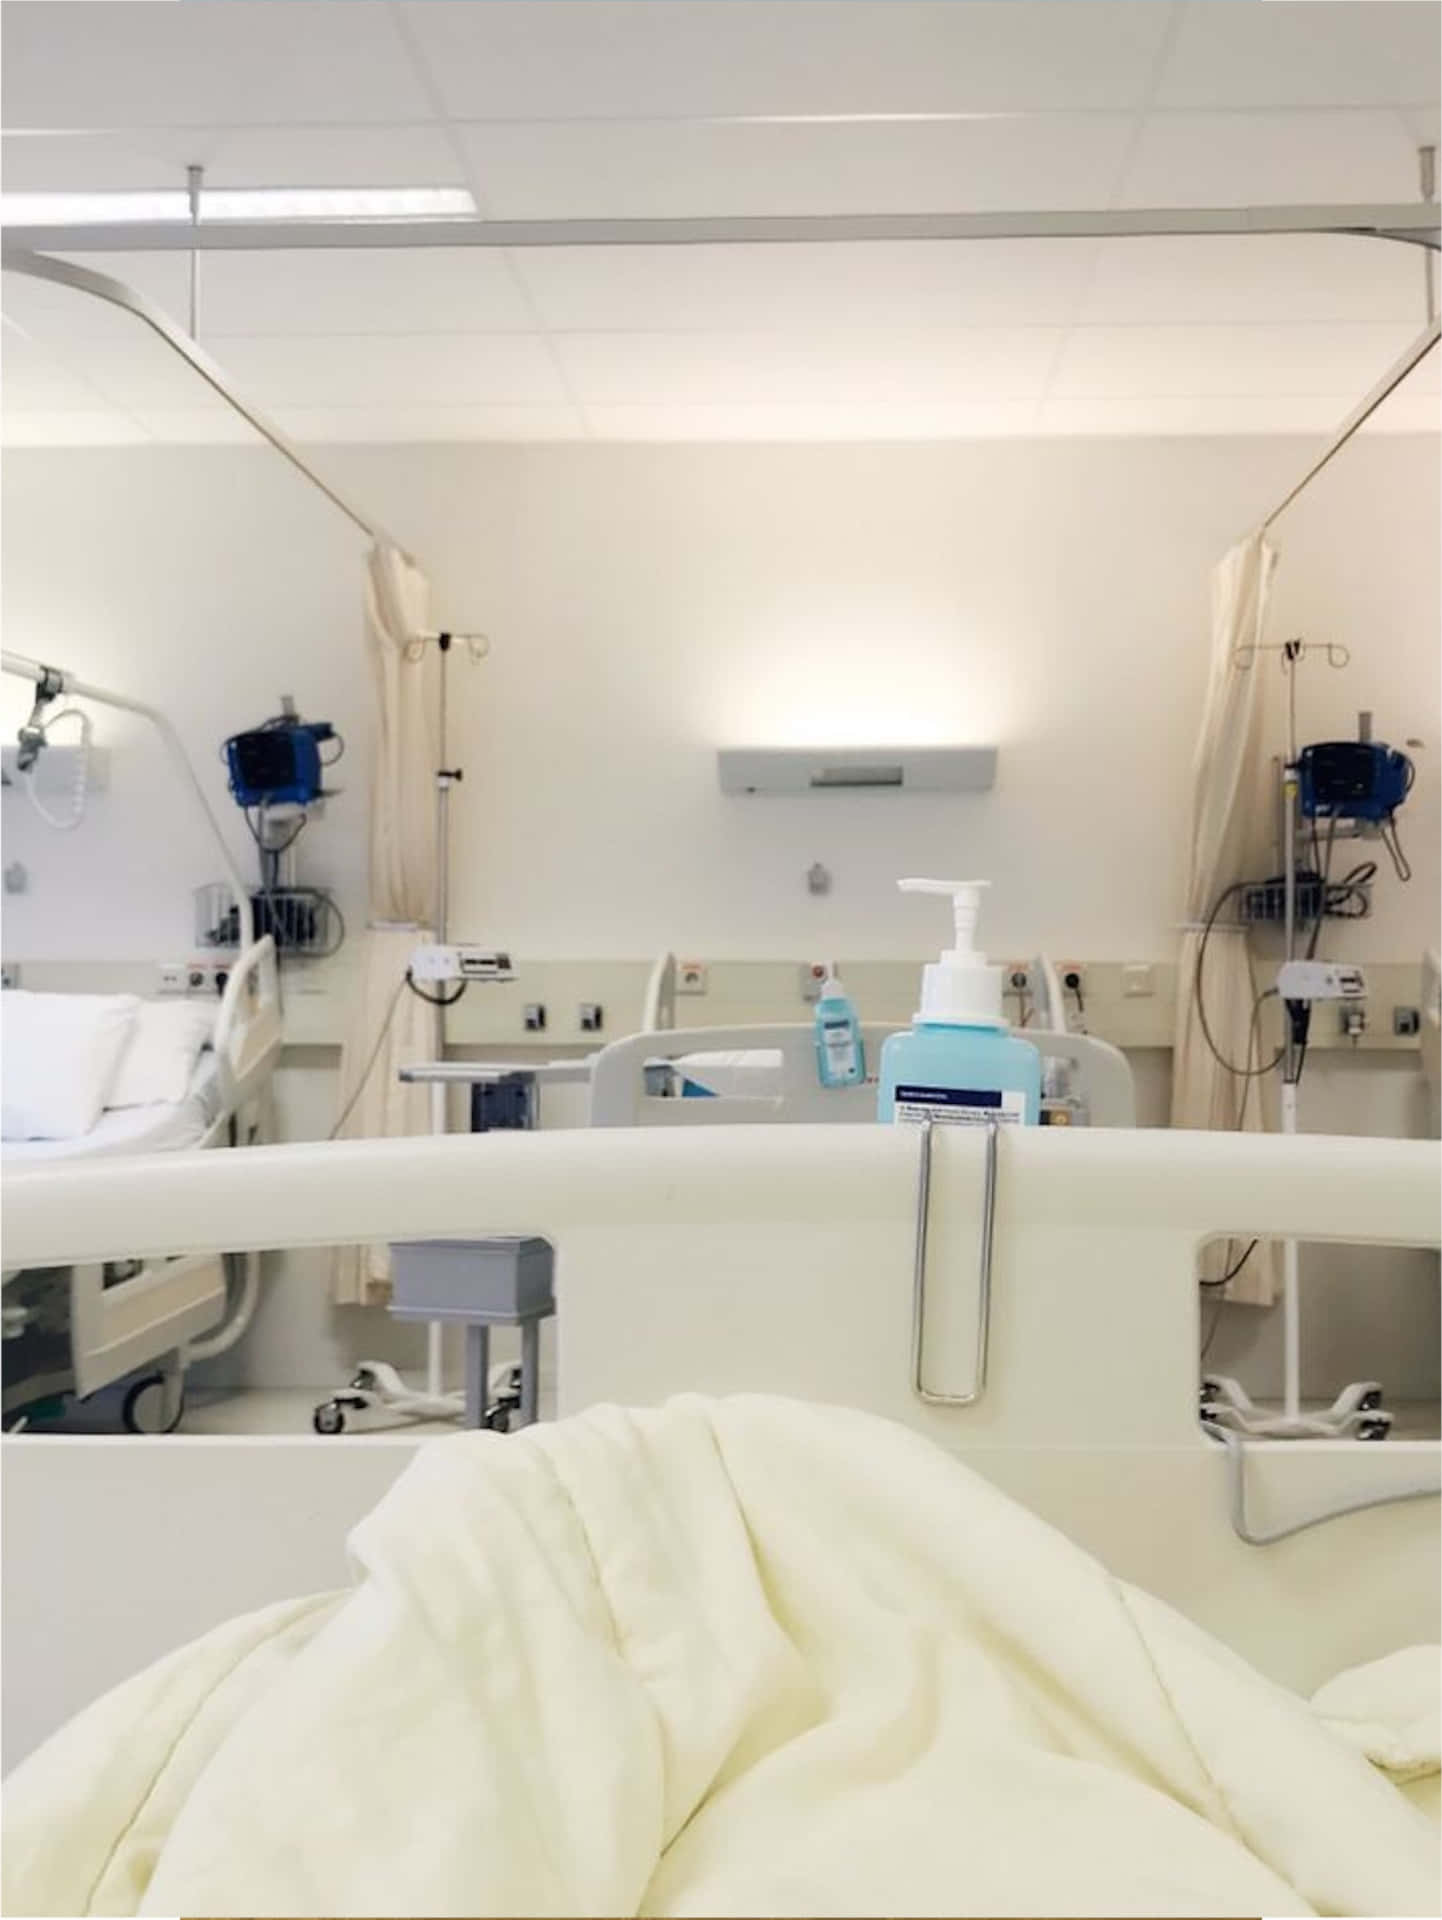 A crisp and fresh hospital room, perfect for patients to heal in.